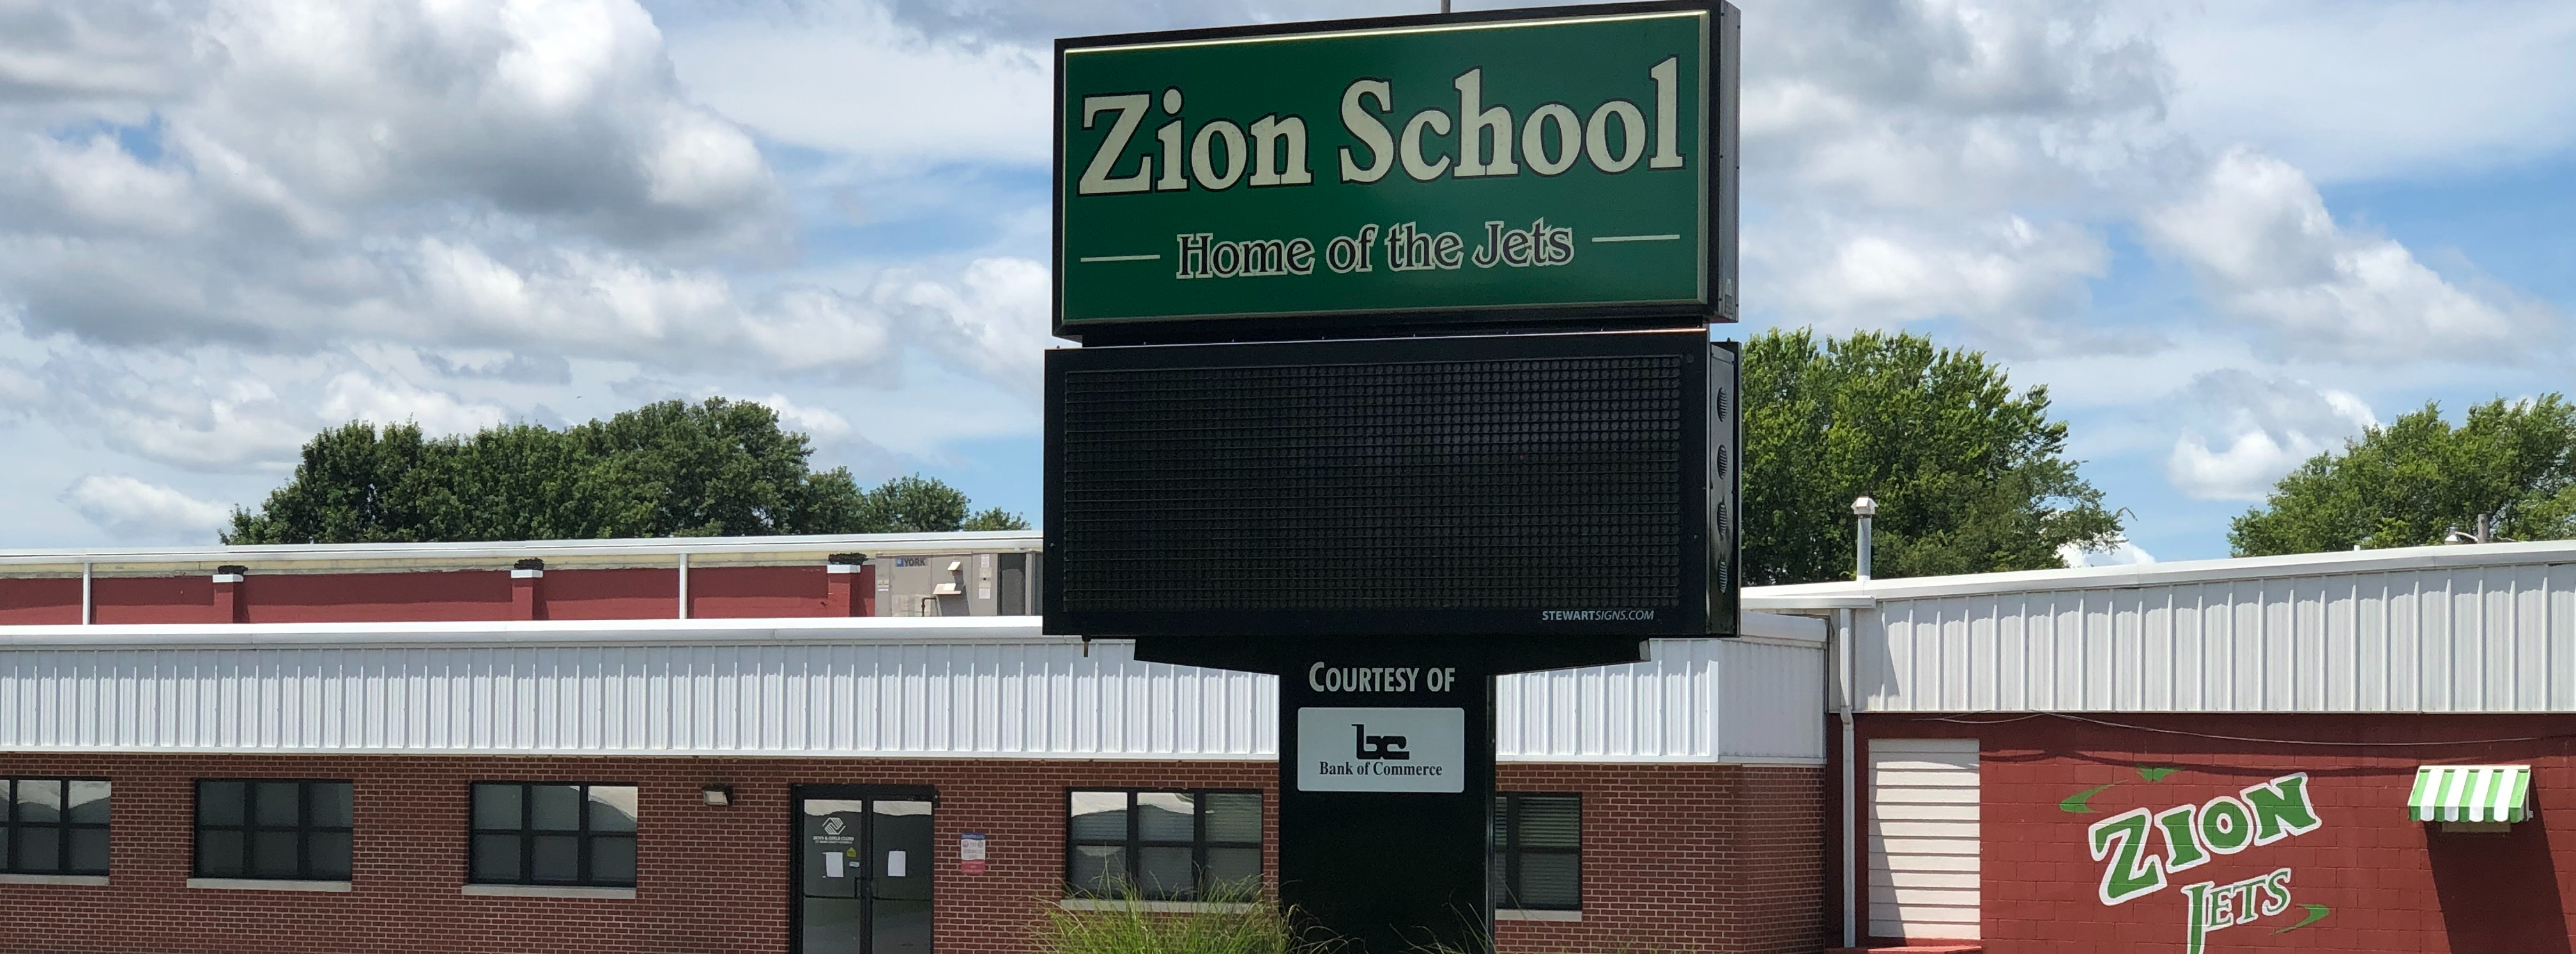 Zion School Sign and Building